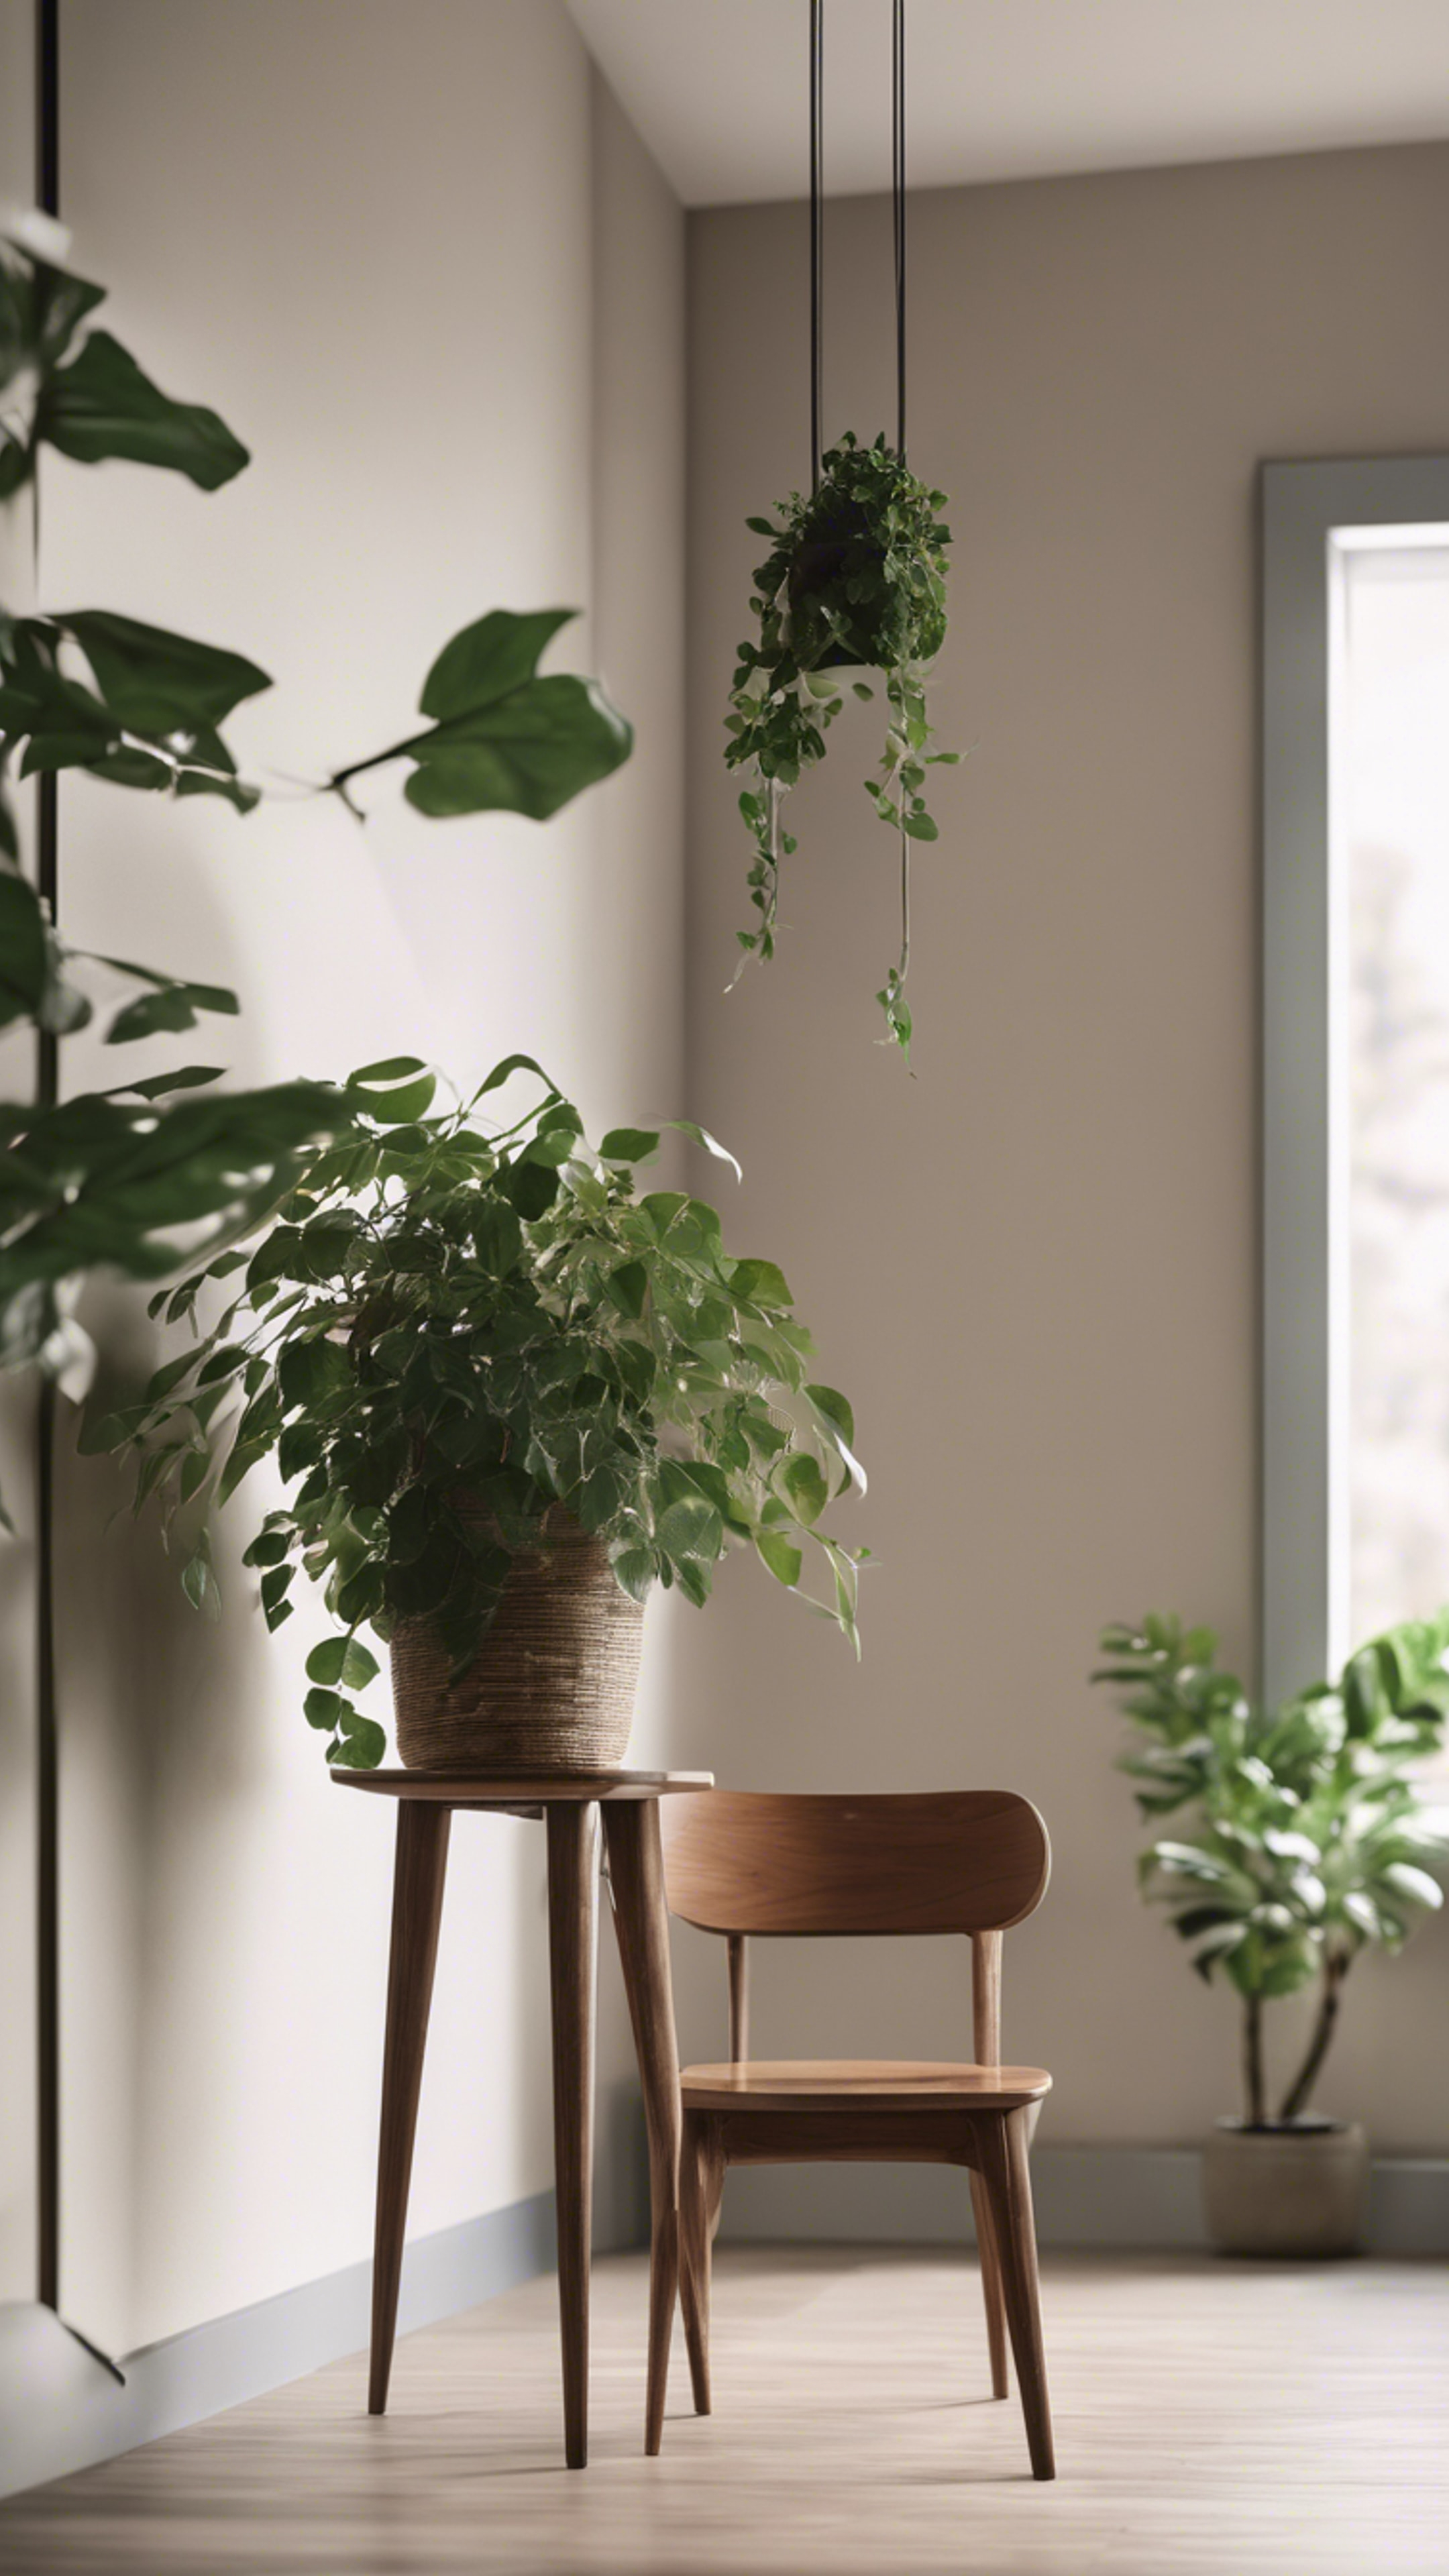 The corner of a minimalist room, featuring a hanging plant and a low, wooden side table. Wallpaper[20a0de2ec9c541069b04]